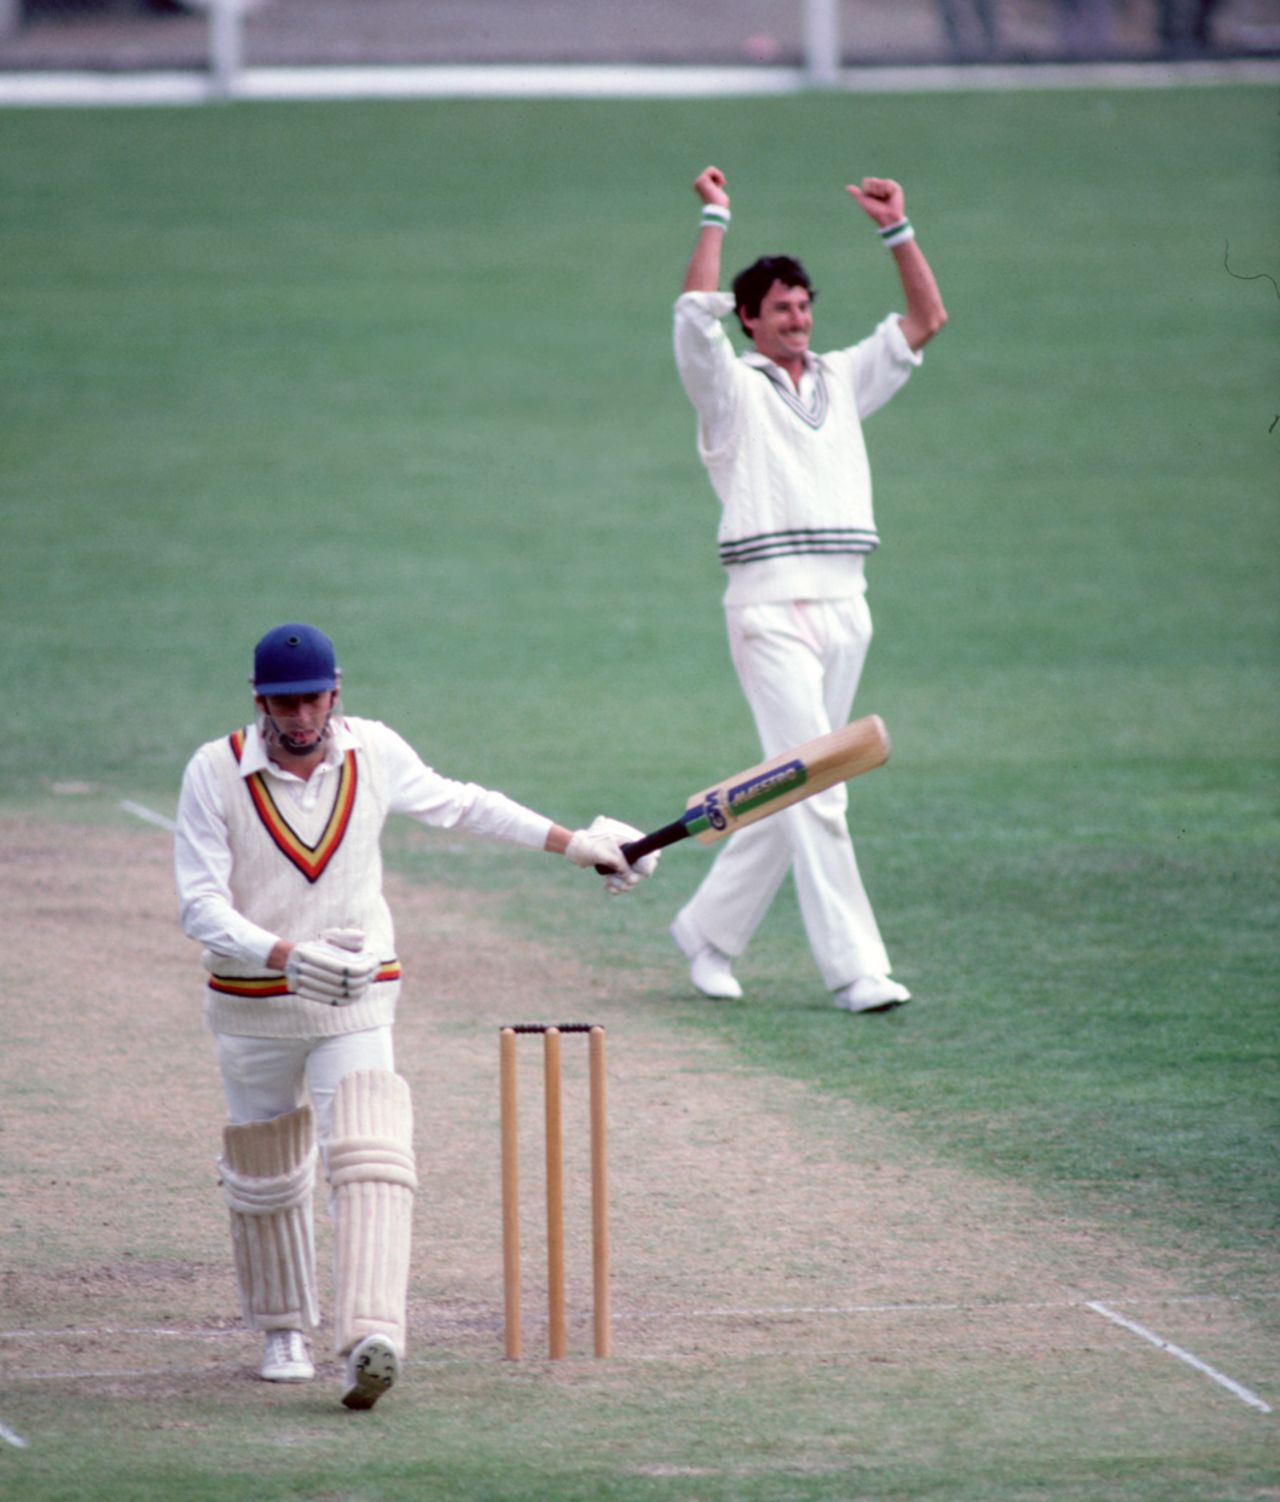 Derek Randall is dismissed off Richard Hadlee's bowling, New Zealand v England, 2nd Test, Christchurch, 3rd day, February 5, 1984